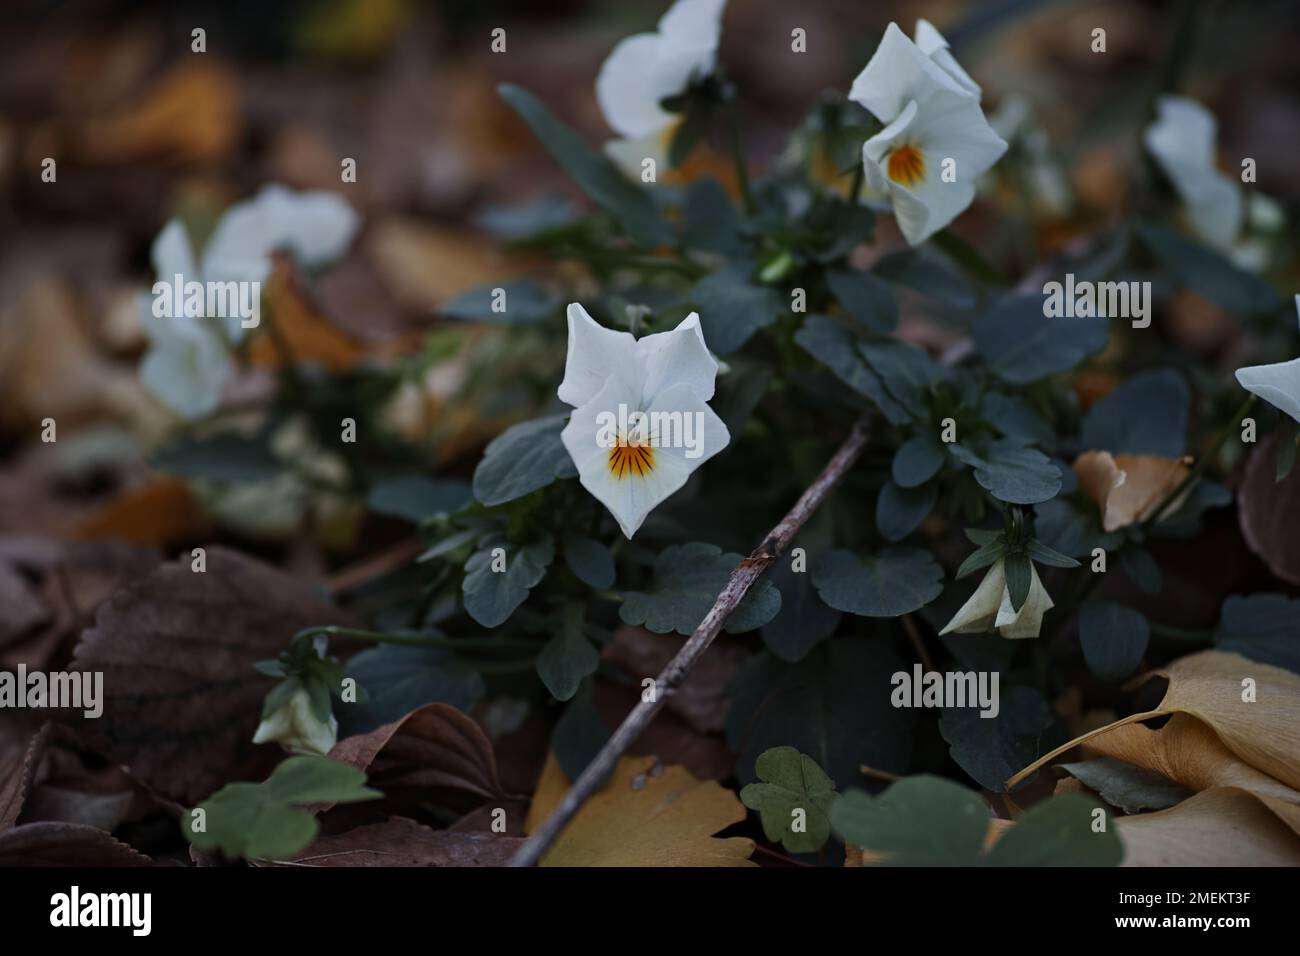 A closeup shot of great white trillium flowers found growing in the wild Stock Photo